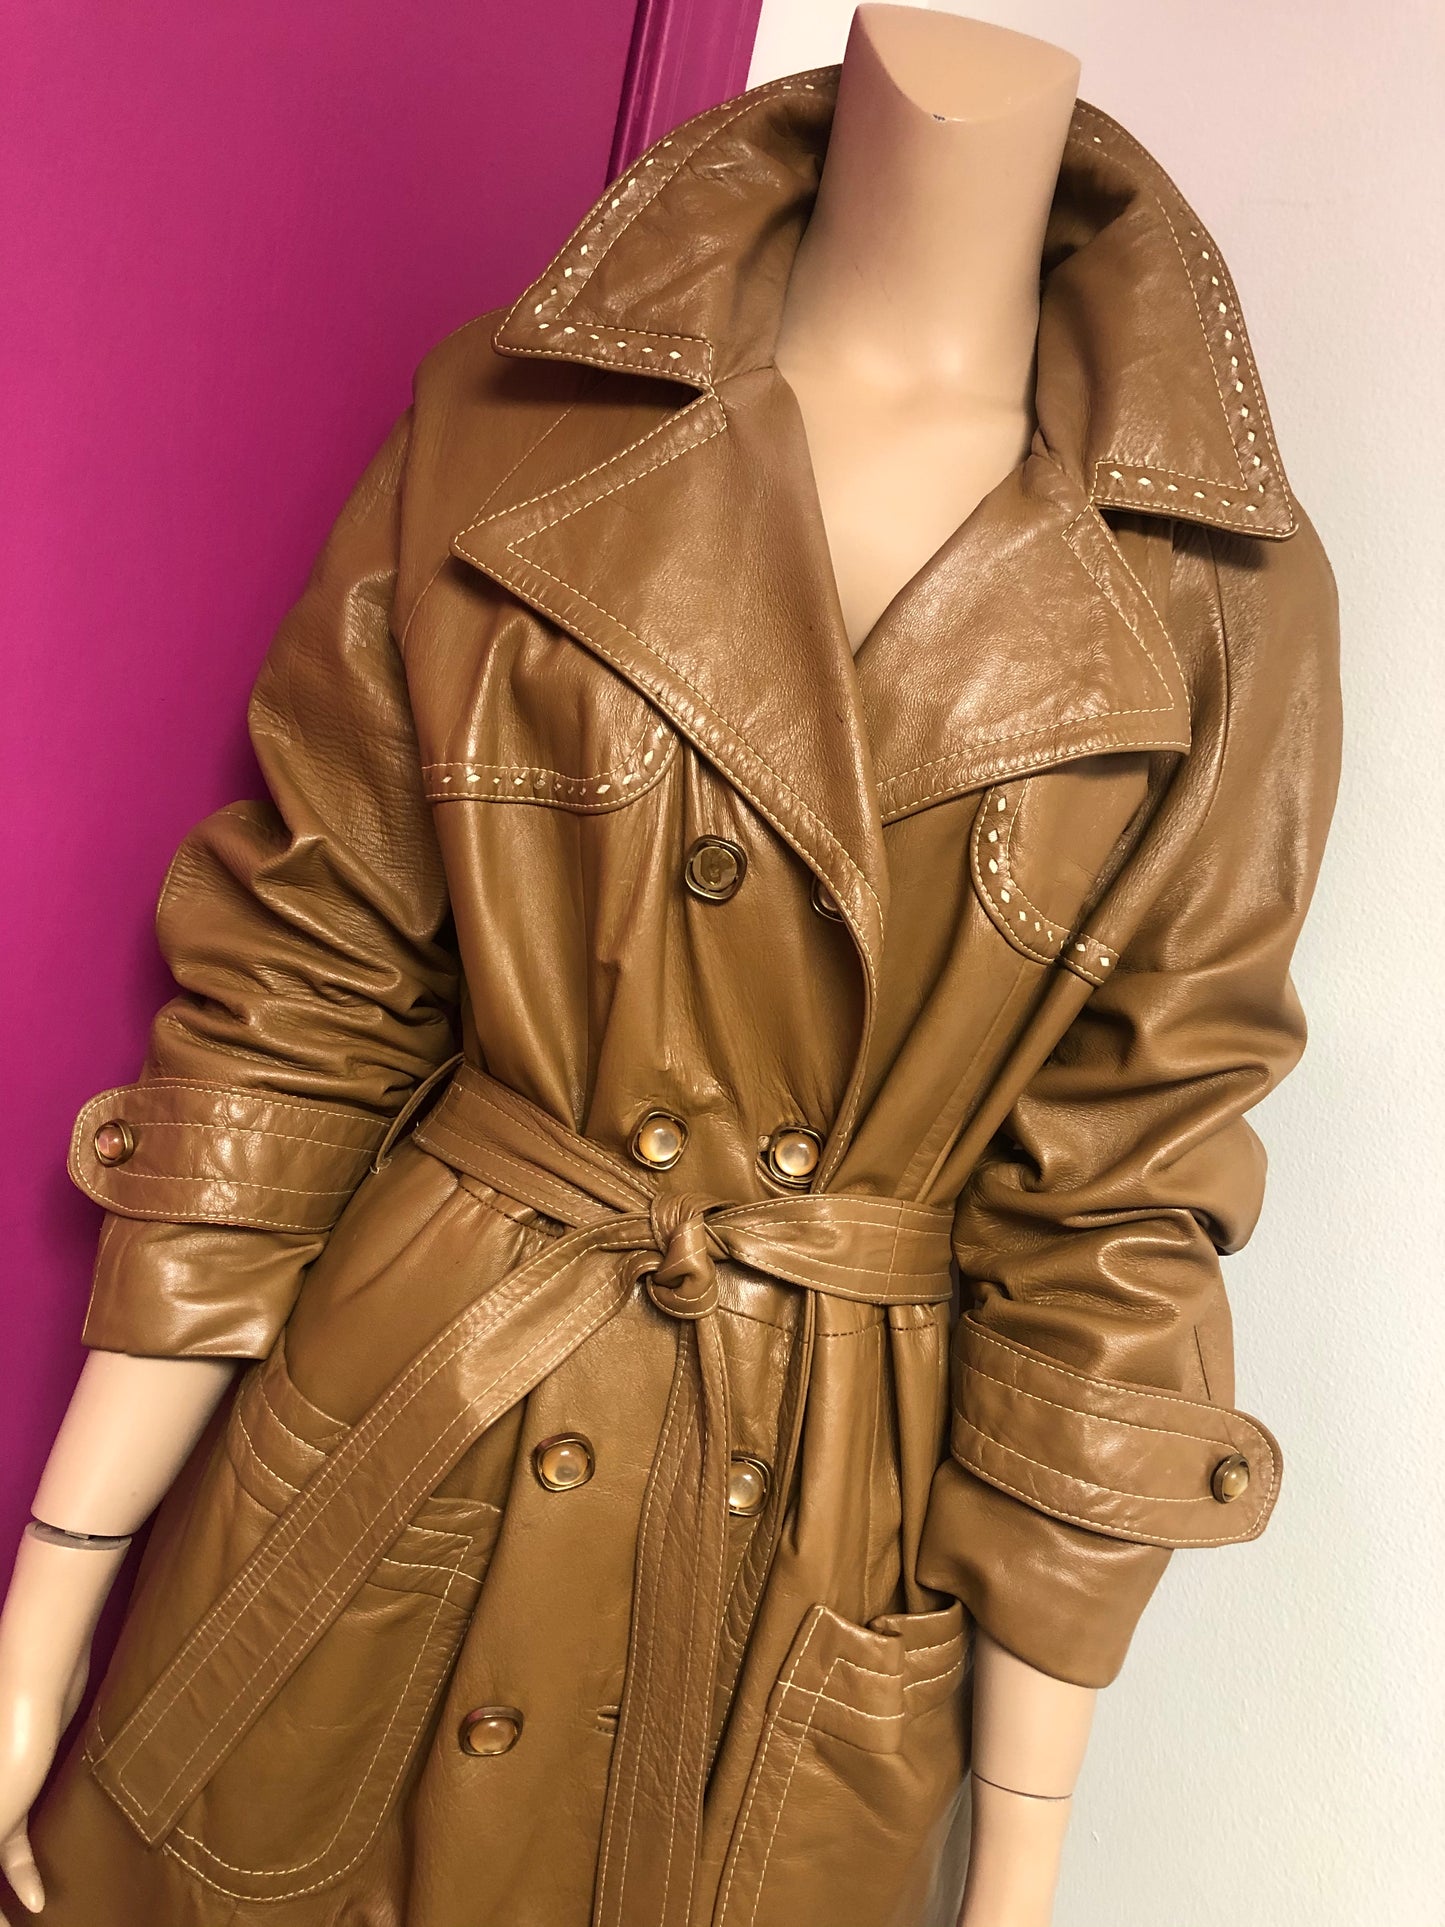 Vintage "Amber" 1/4 Leather Trench Size 1X